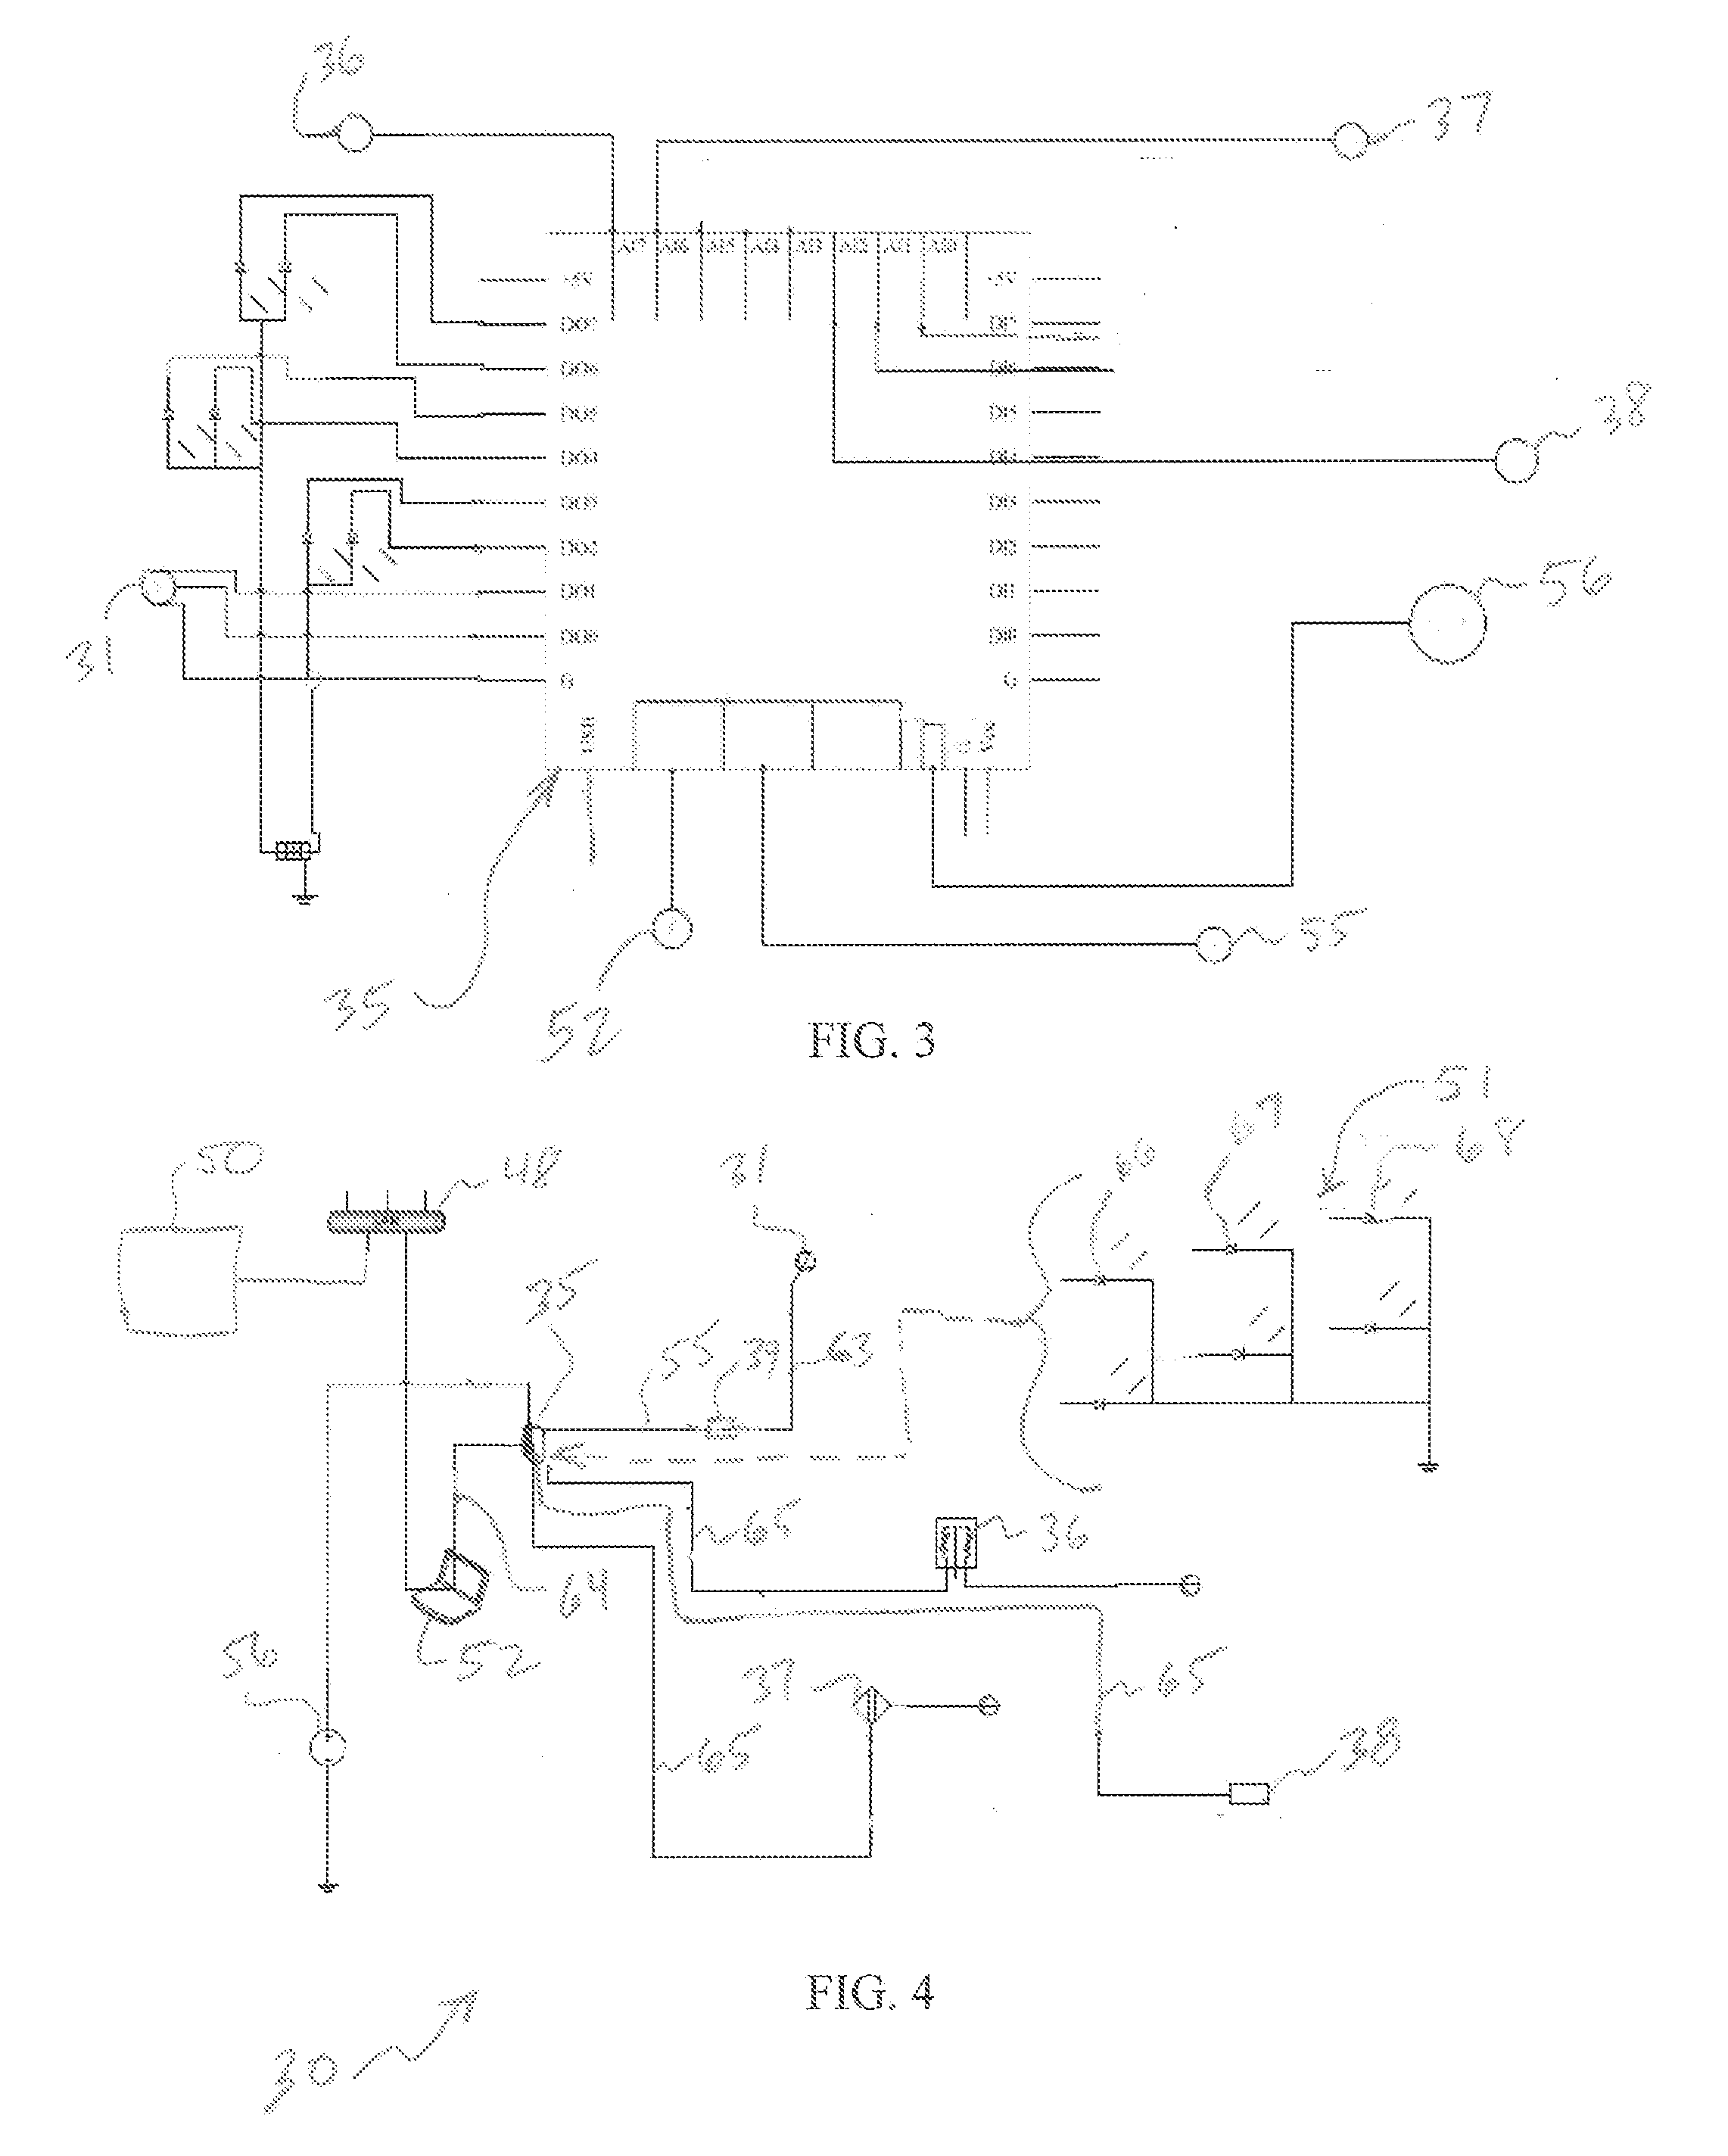 Liability Intervention Logistical Innovation System and Method